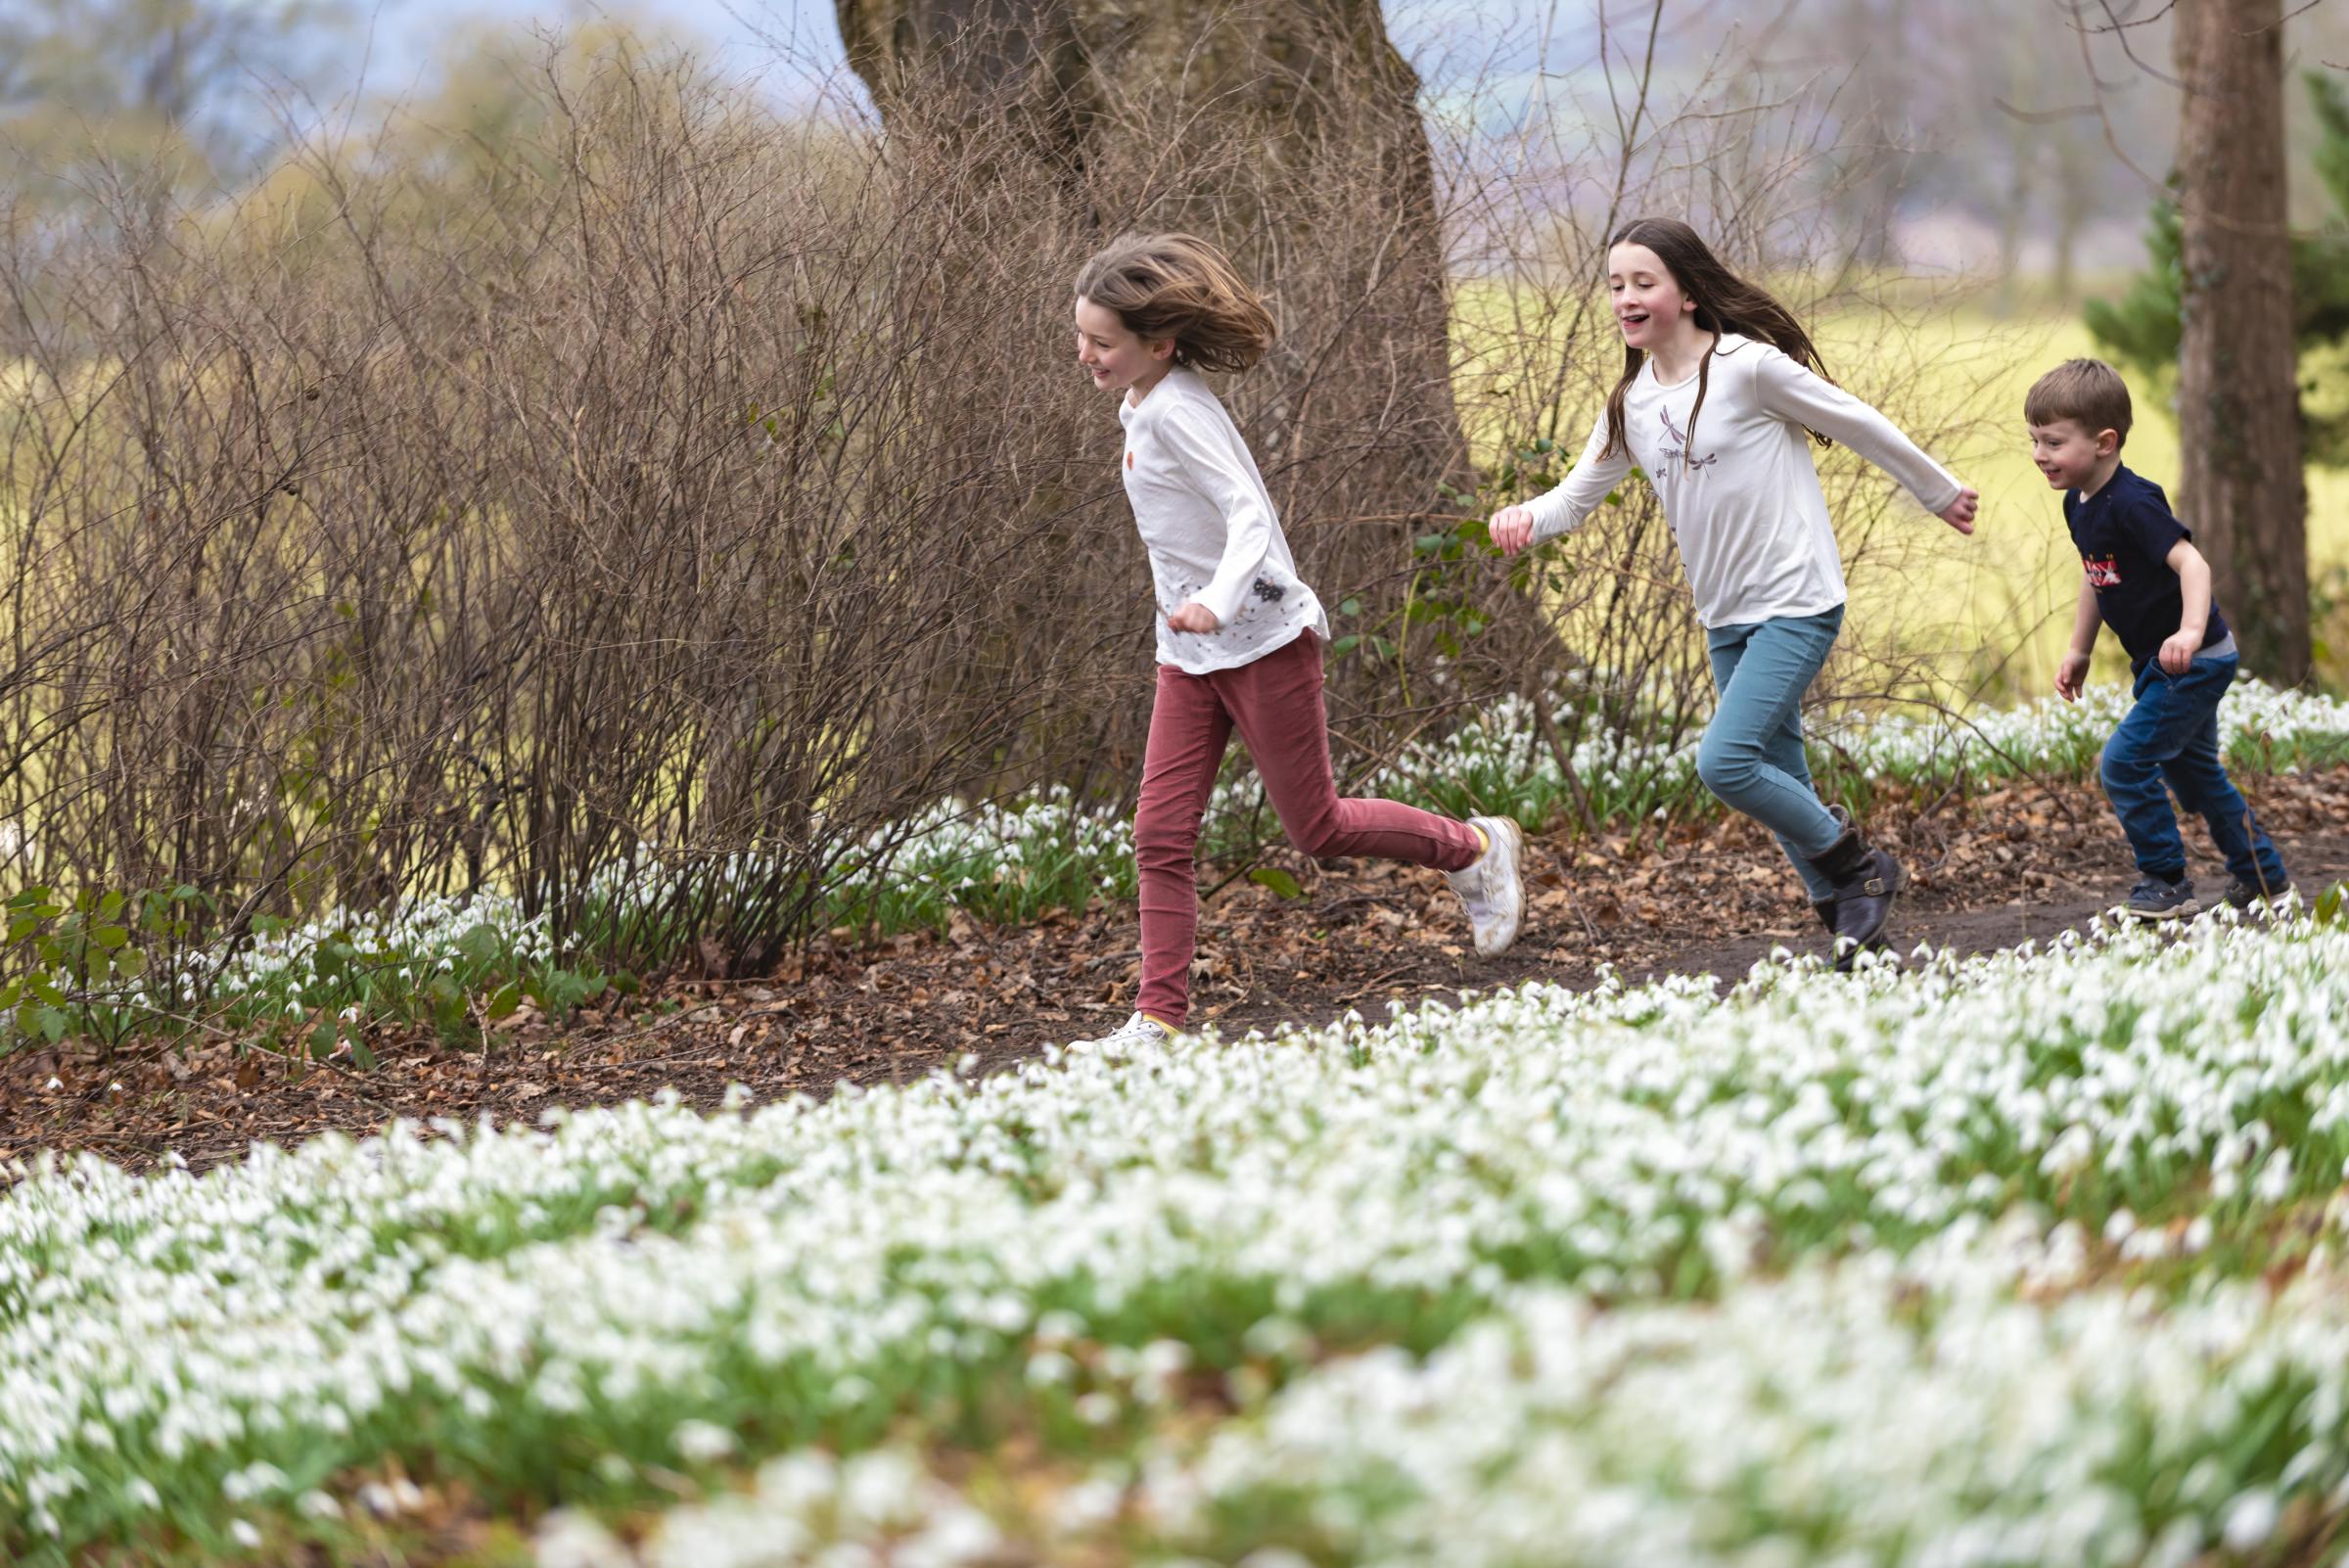 Children and snowdrops at Chirk Castle, Wrexham. Photo: ©National Trust by Paul Harris